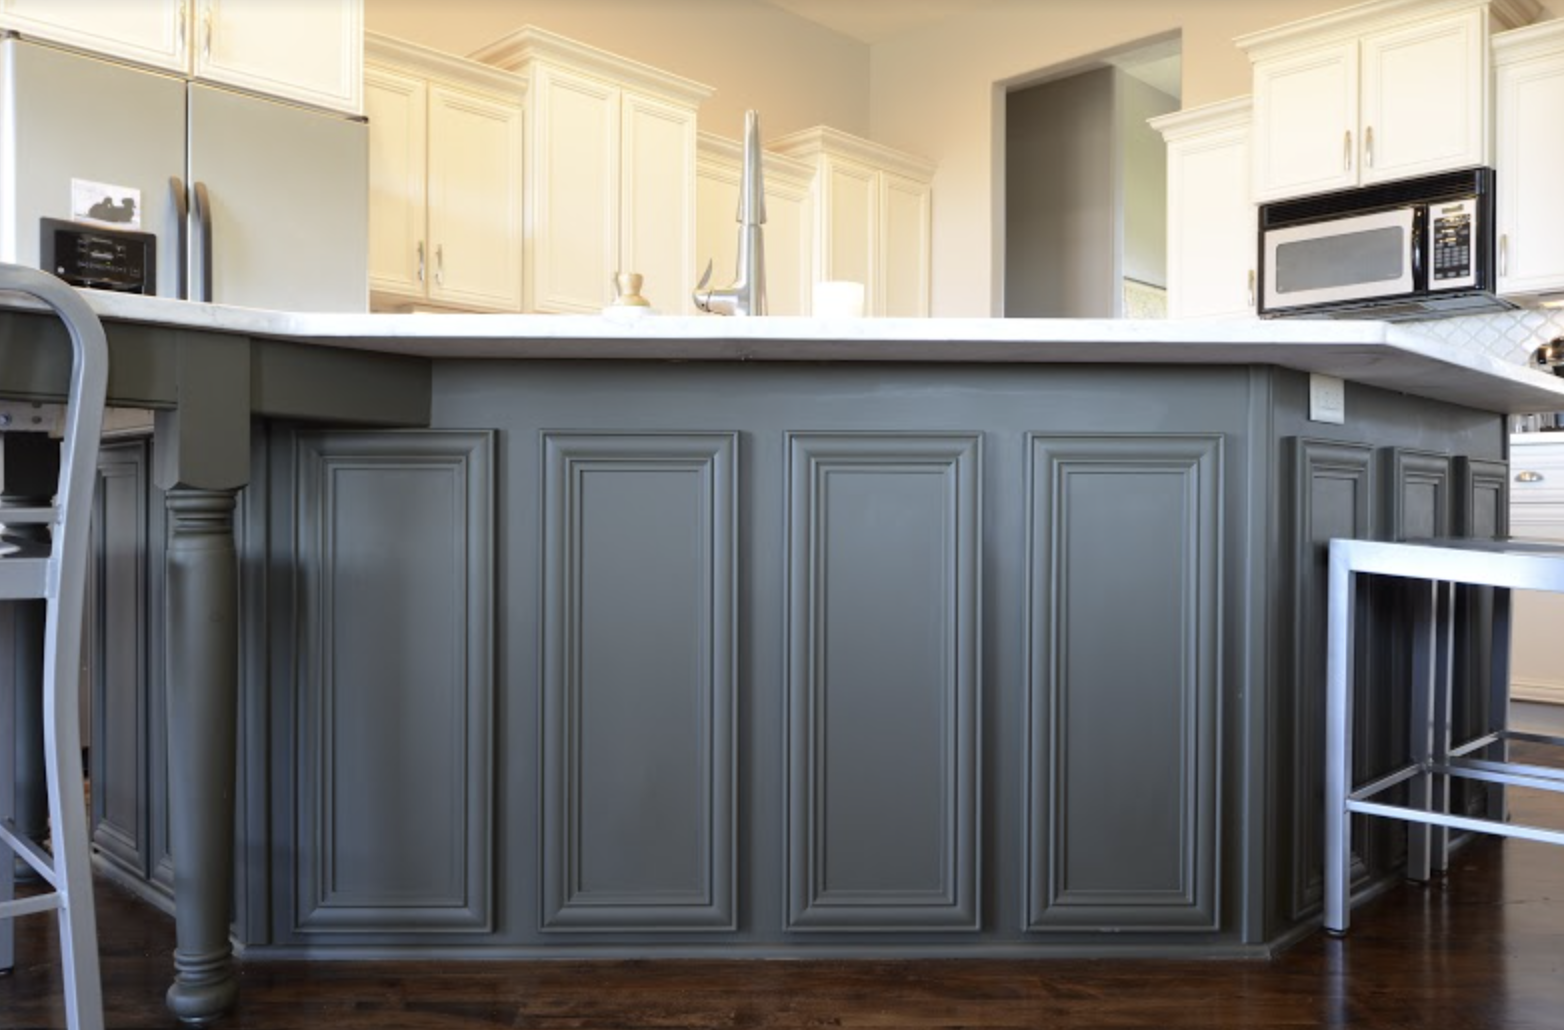 Island kitchen cabinets painted grey